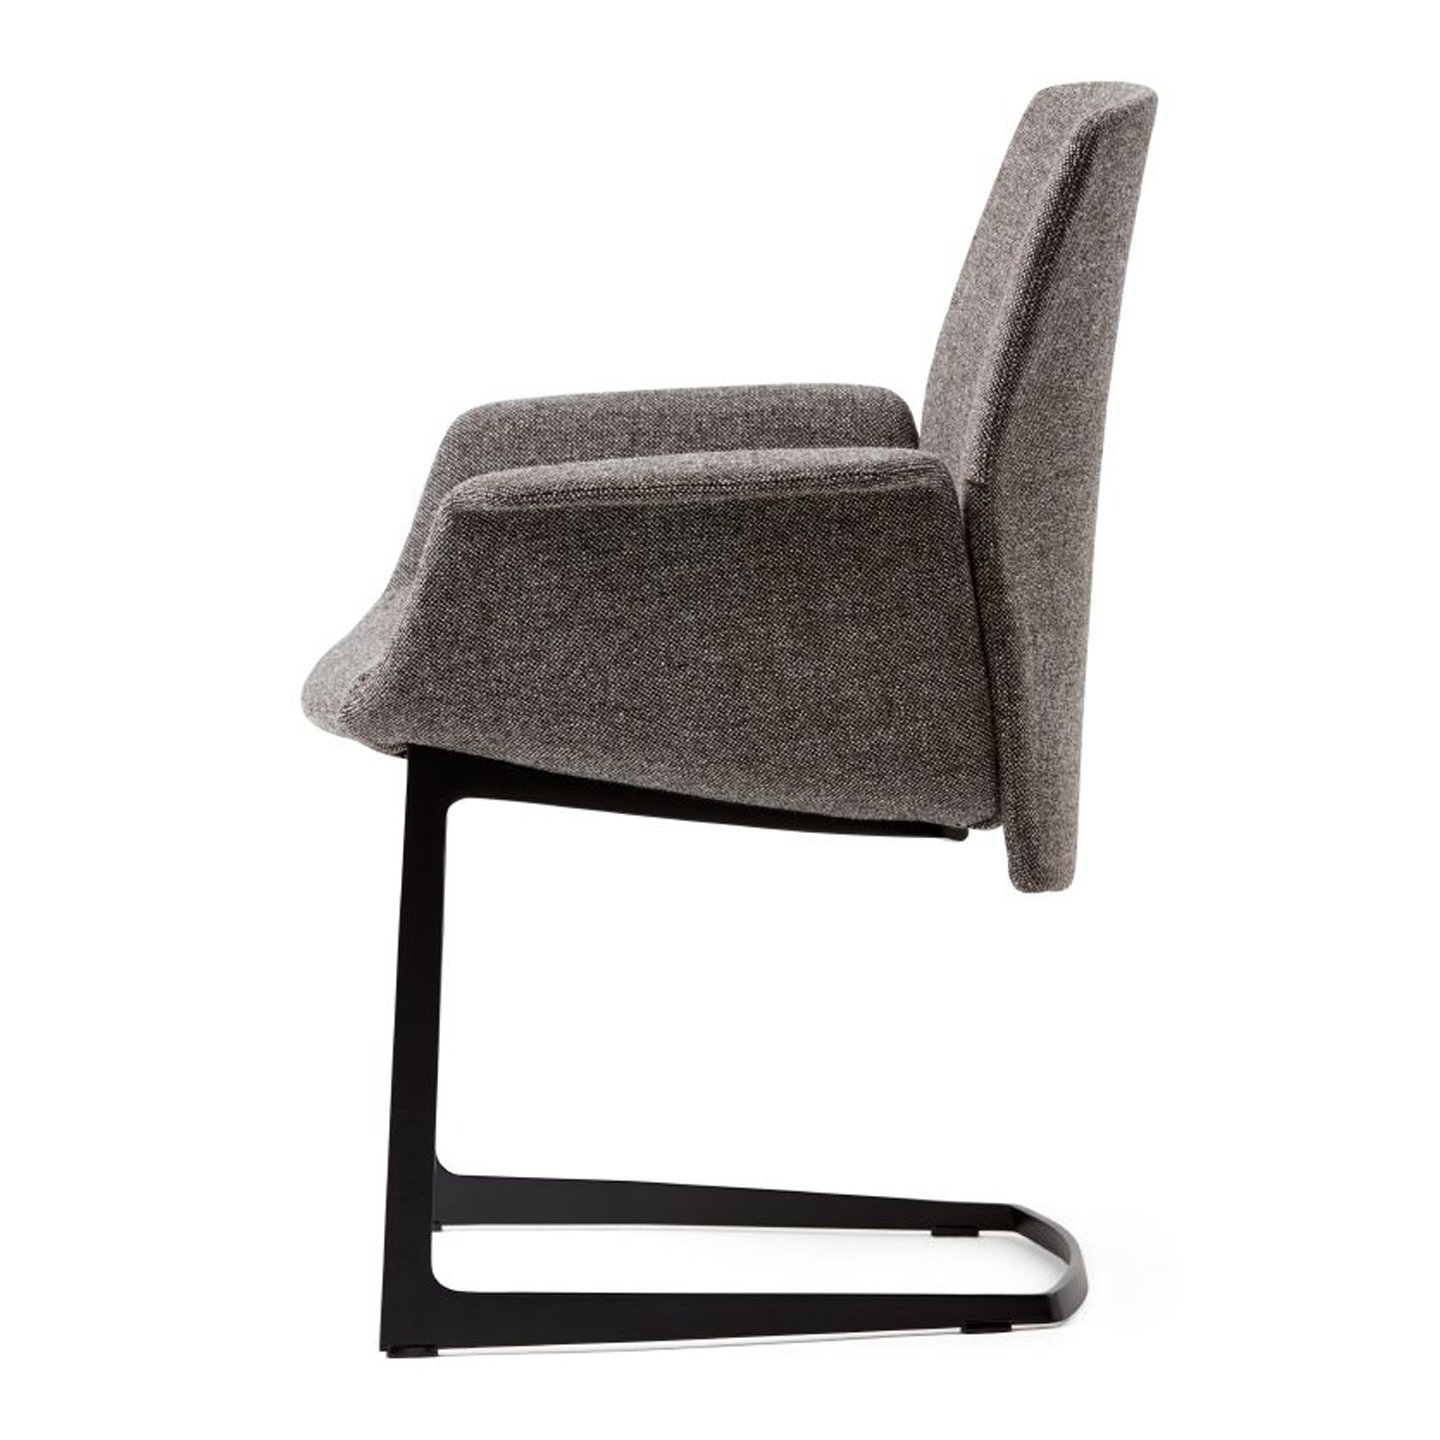 Haworth Downtown chair in grey upholstery with a cantilever base